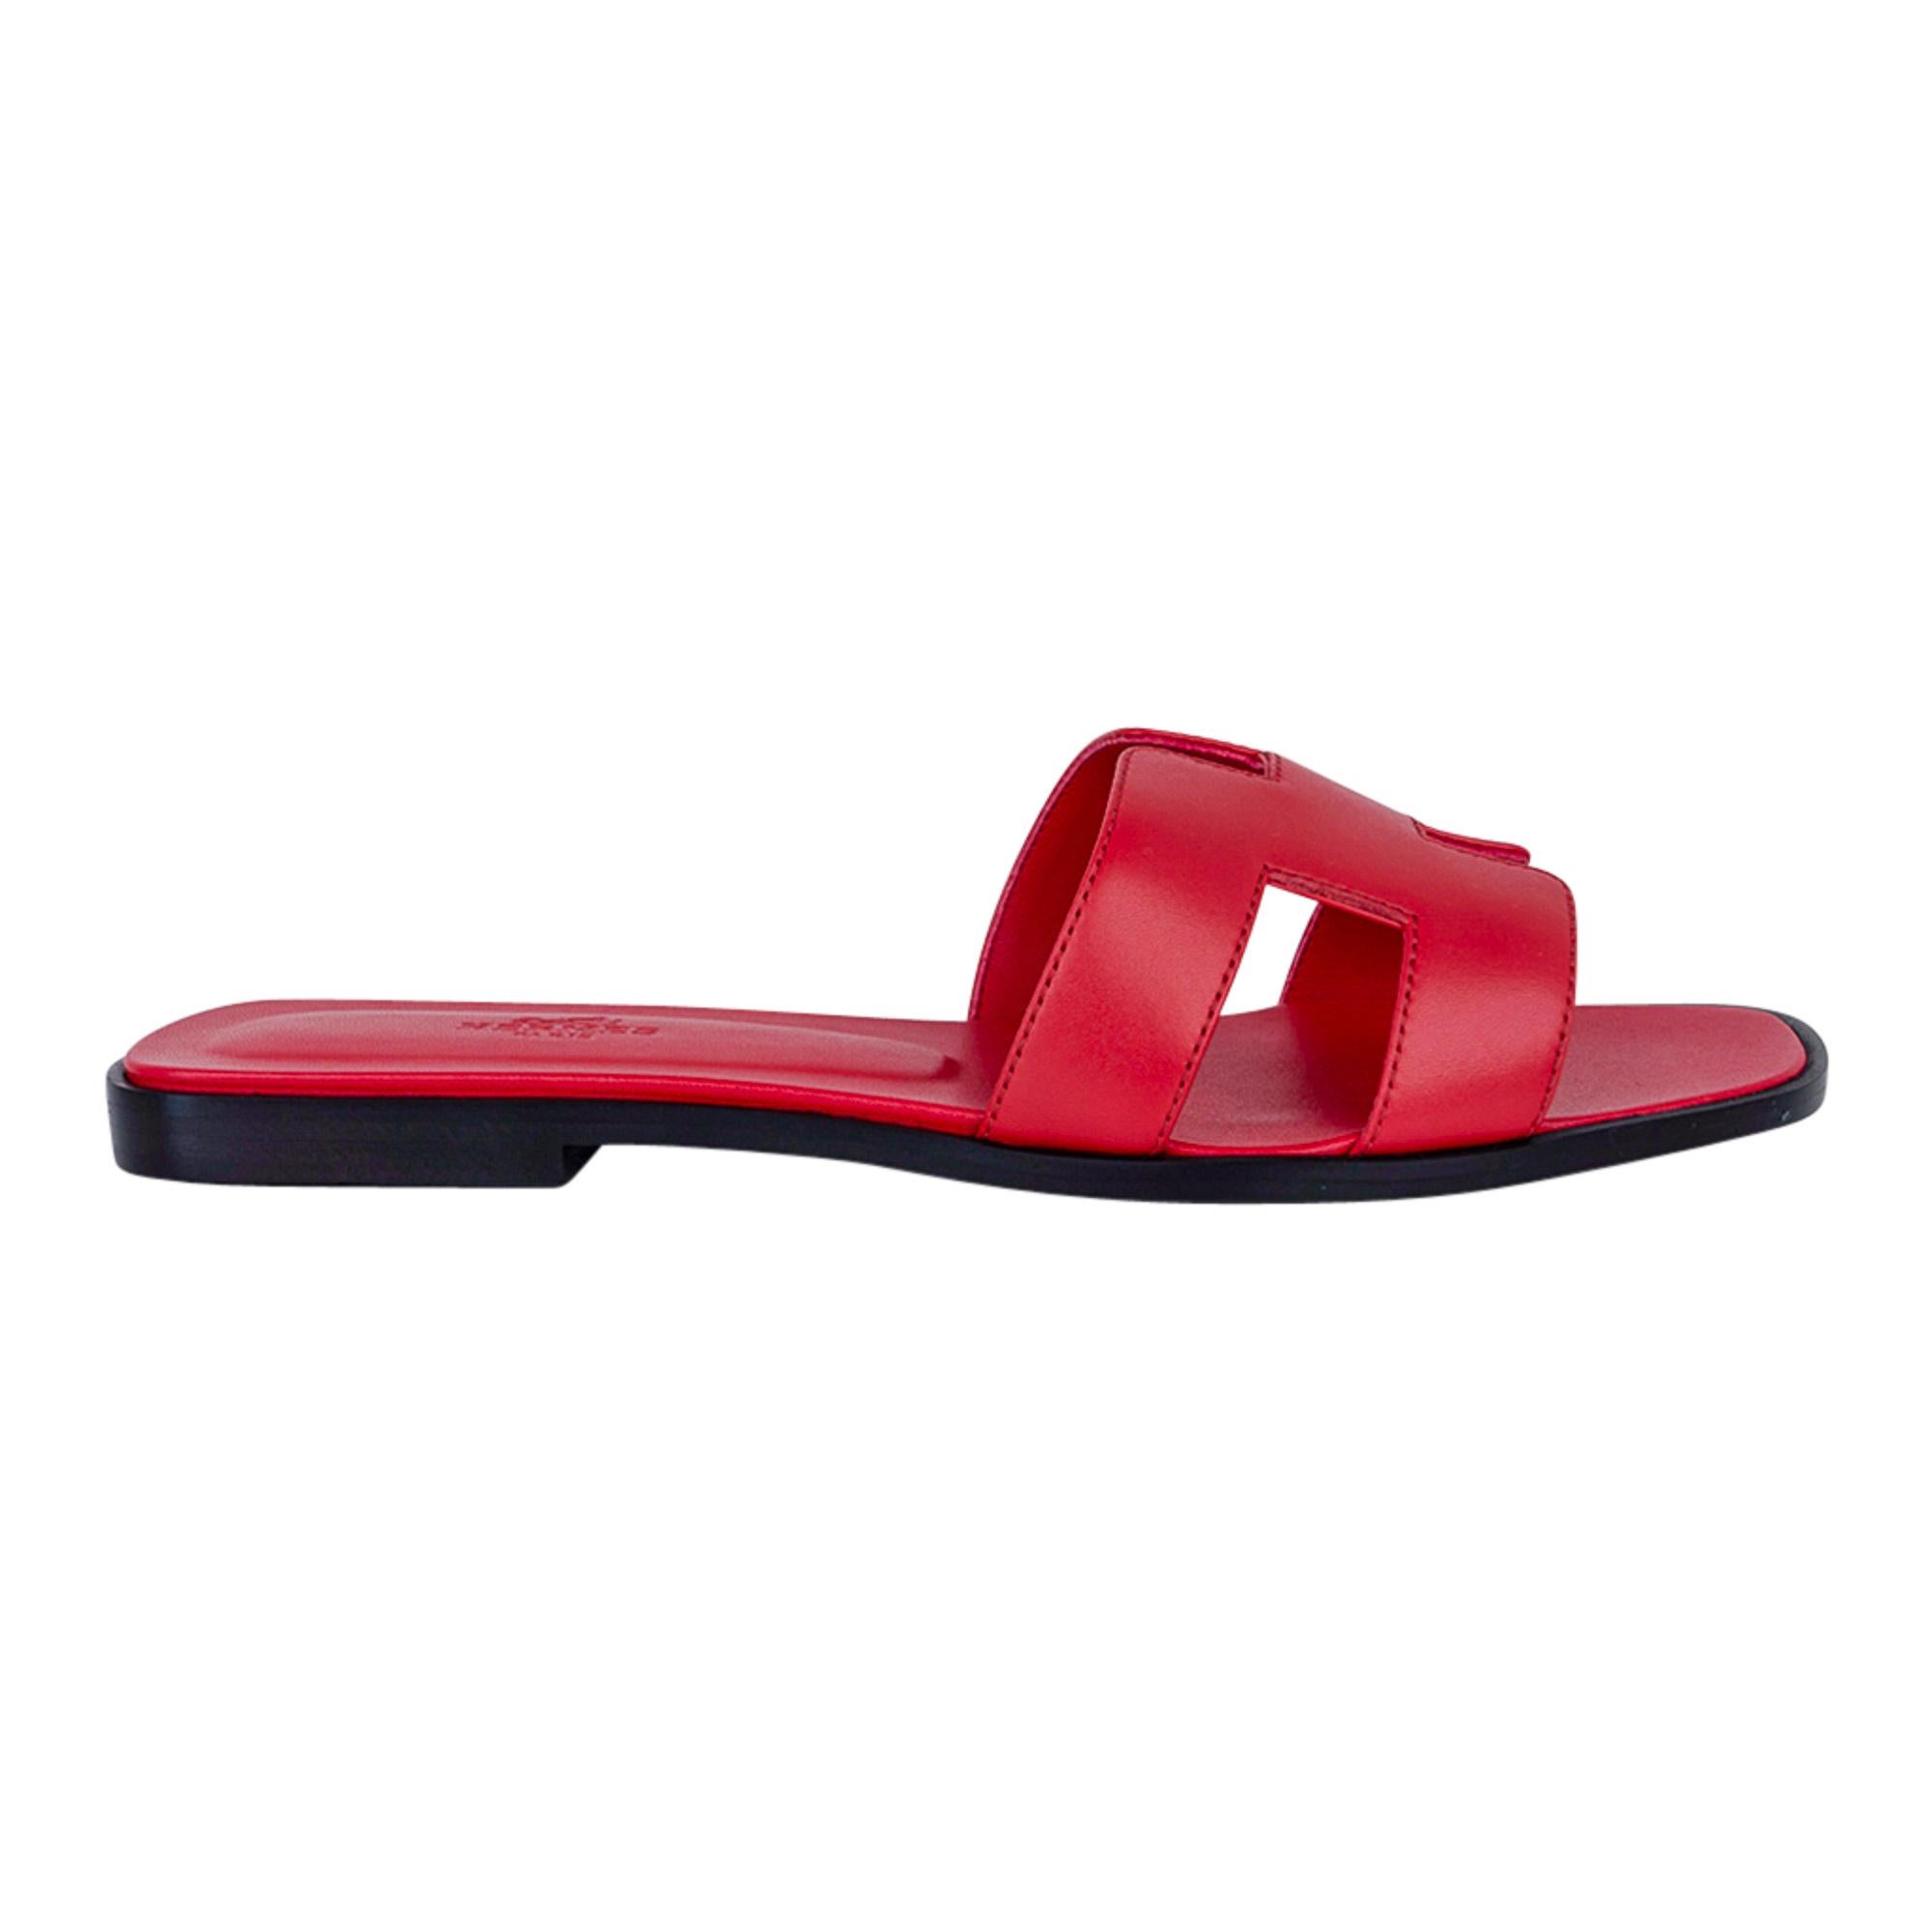 Hermes Oran vibrant Rose Cotinga pink flat sandal.
These rich, saturated pink slides are a must for foot flirting!
Hermes Paris embossed leather insole. 
Wood heel with leather sole.  
Comes with sleepers and and signature Hermes box. 
NEW or NEVER